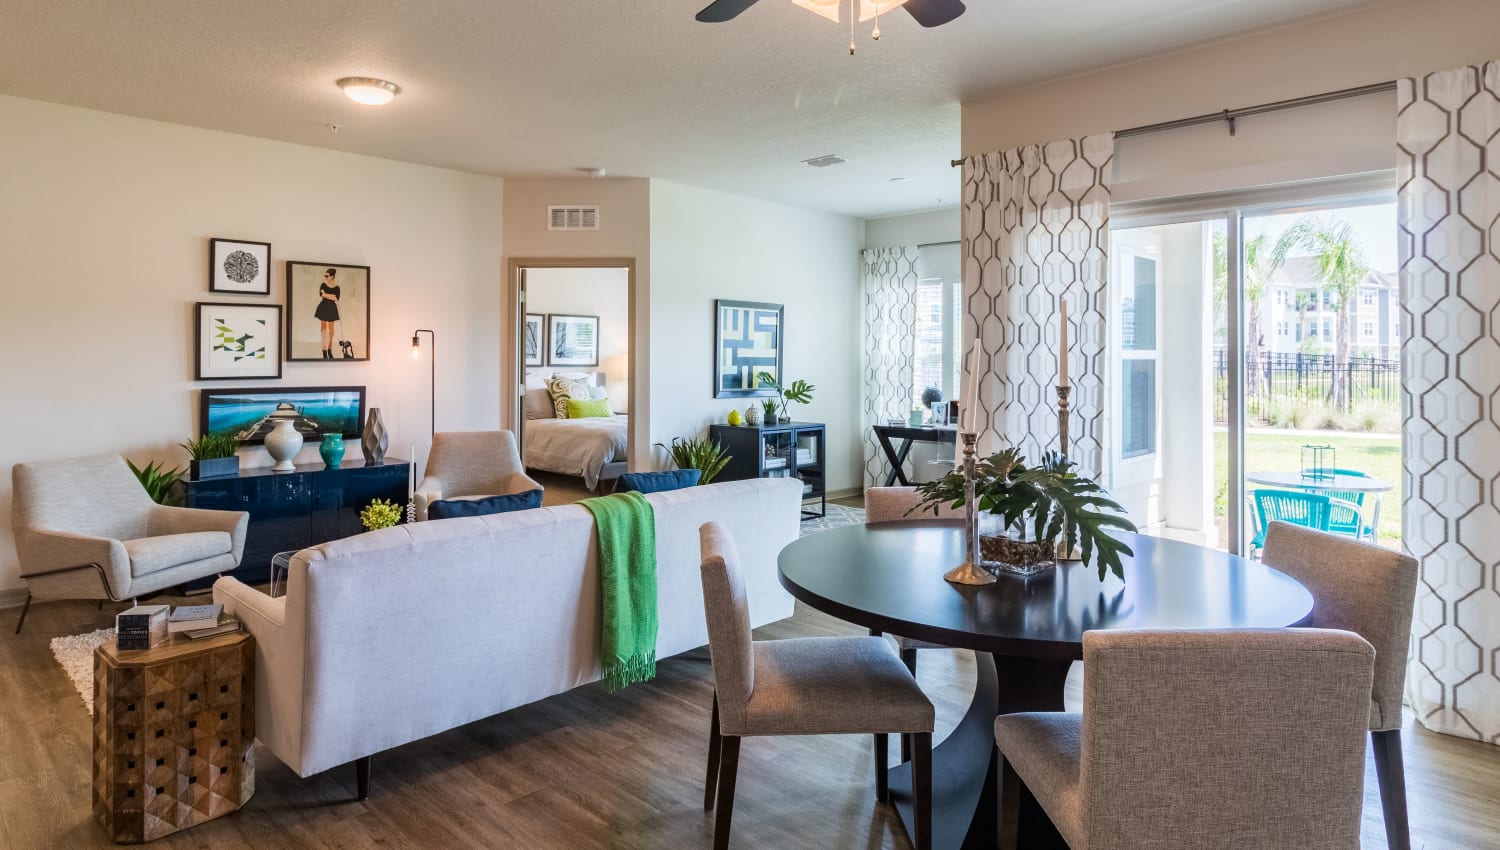 Dining nook and living room with large windows at Lakeline at Bartram Park in Jacksonville, Florida